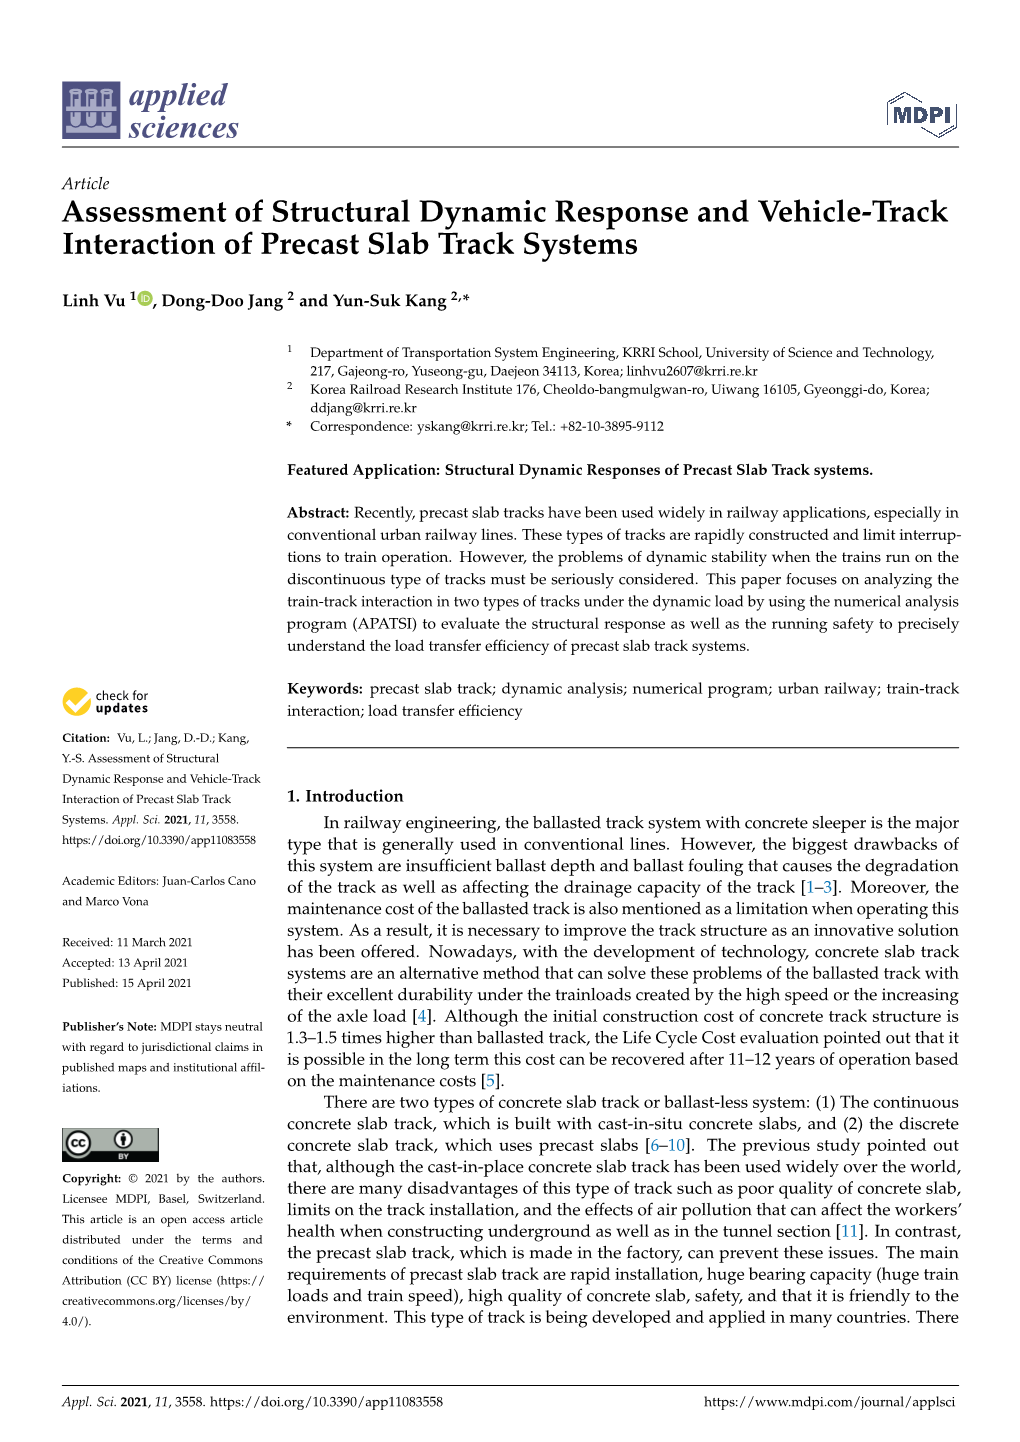 Assessment of Structural Dynamic Response and Vehicle-Track Interaction of Precast Slab Track Systems